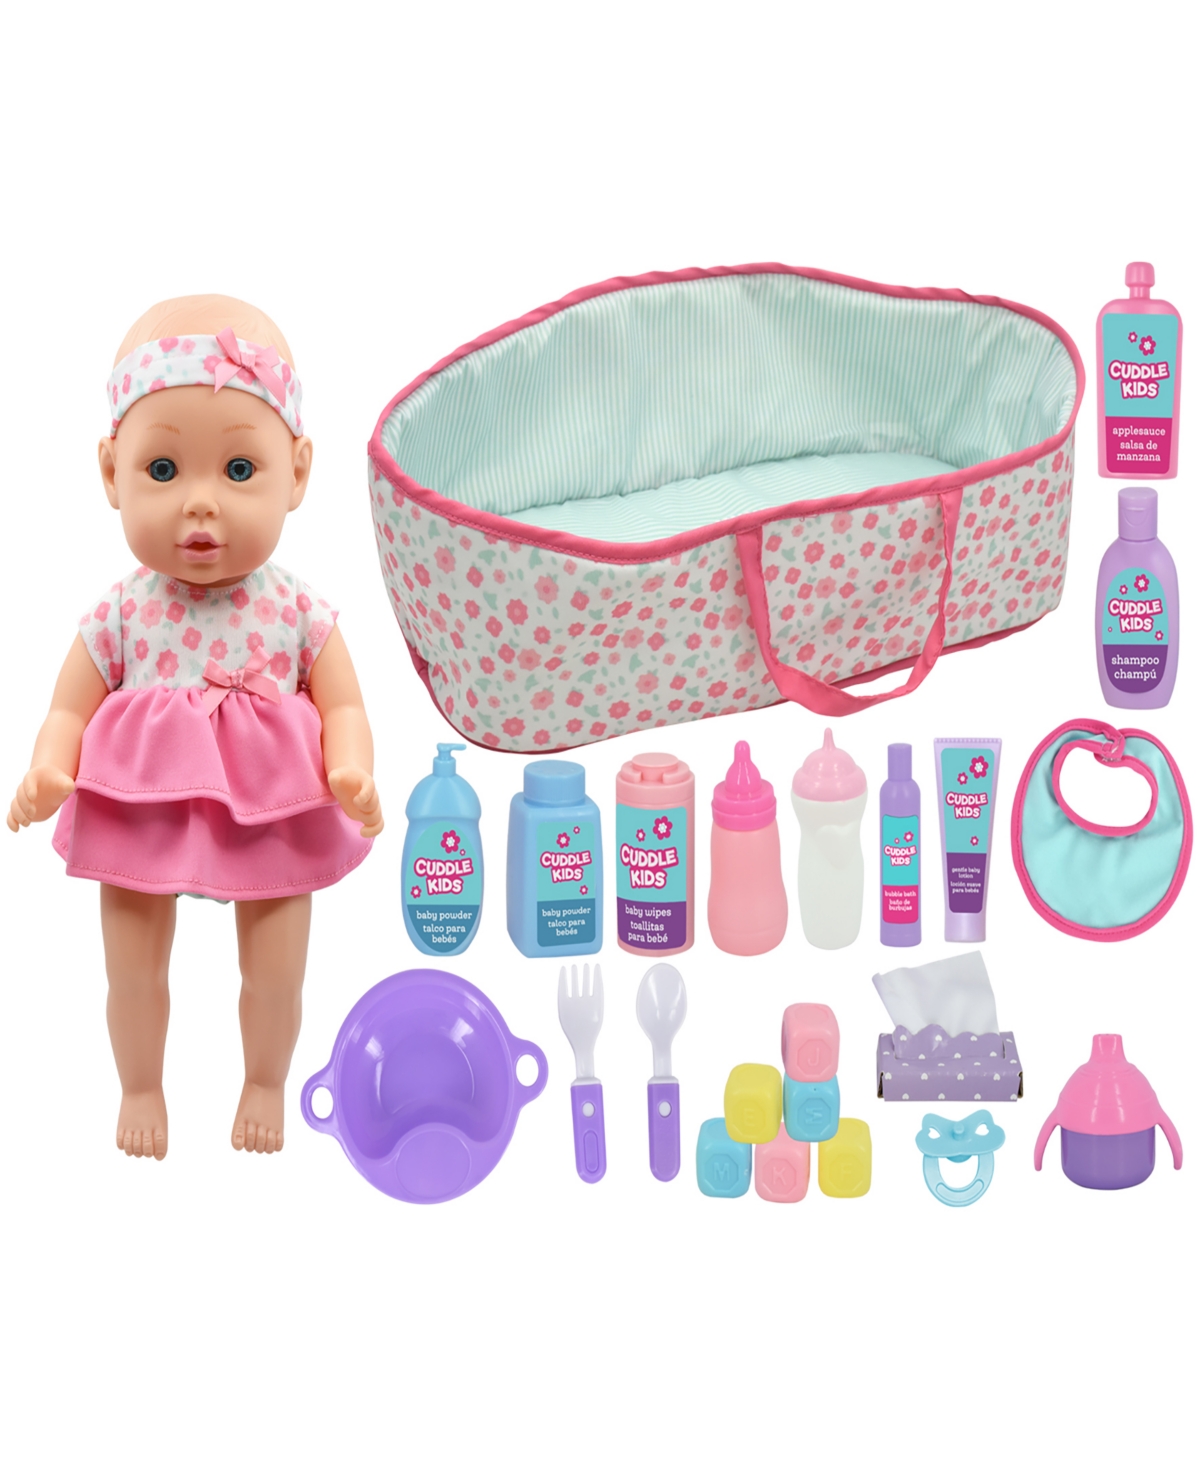 Cuddle Baby Doll Carry Play Set, 27 Pieces In Multi